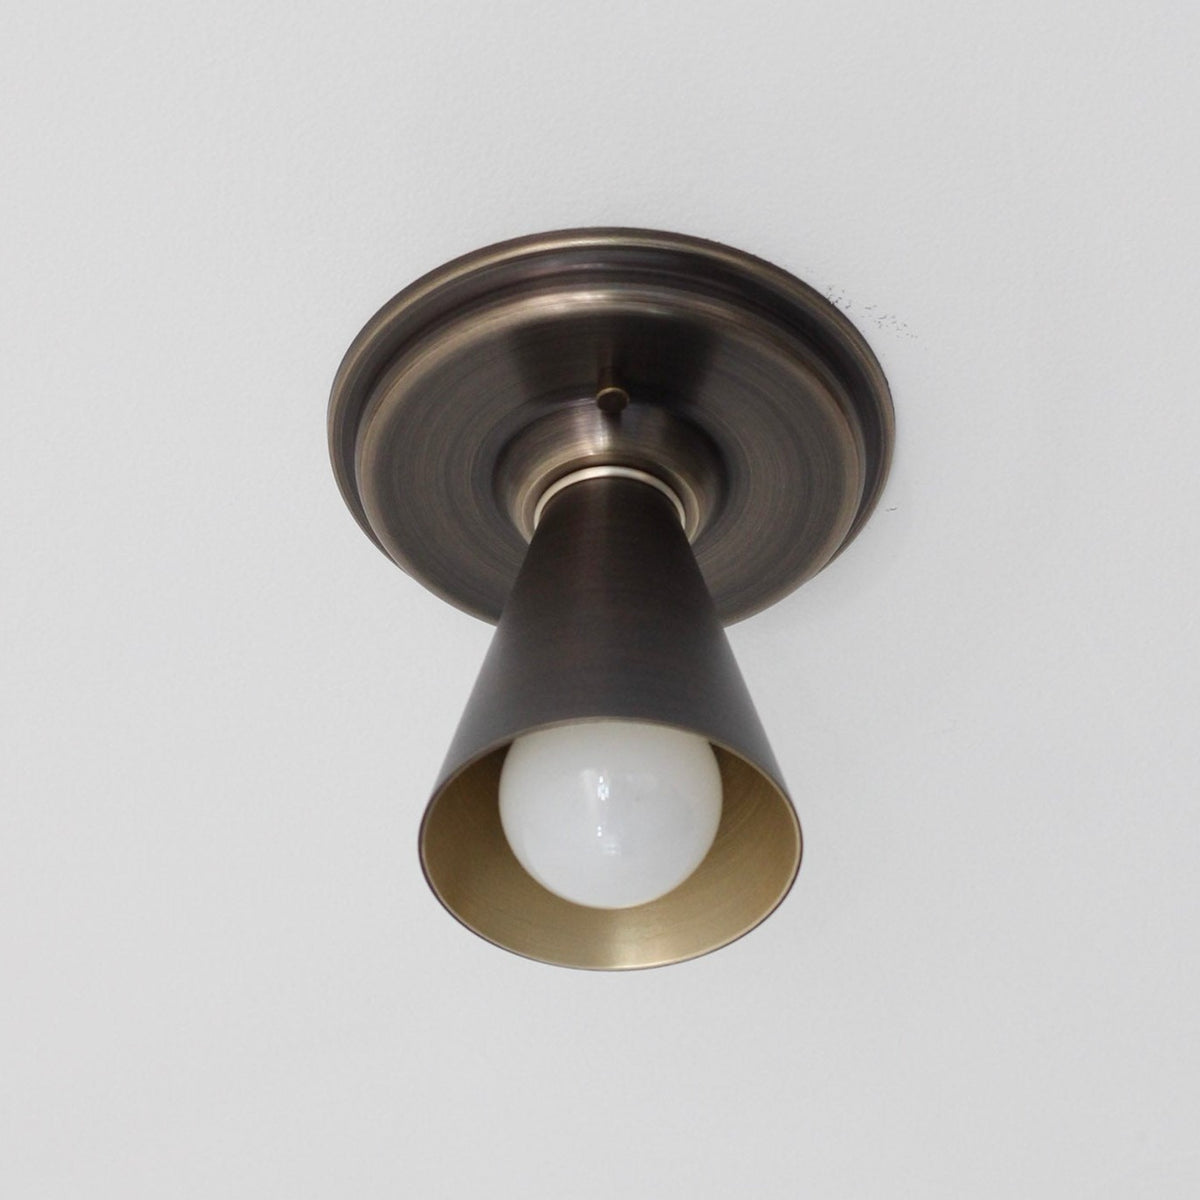 Ceiling Fixture for Low Ceilings